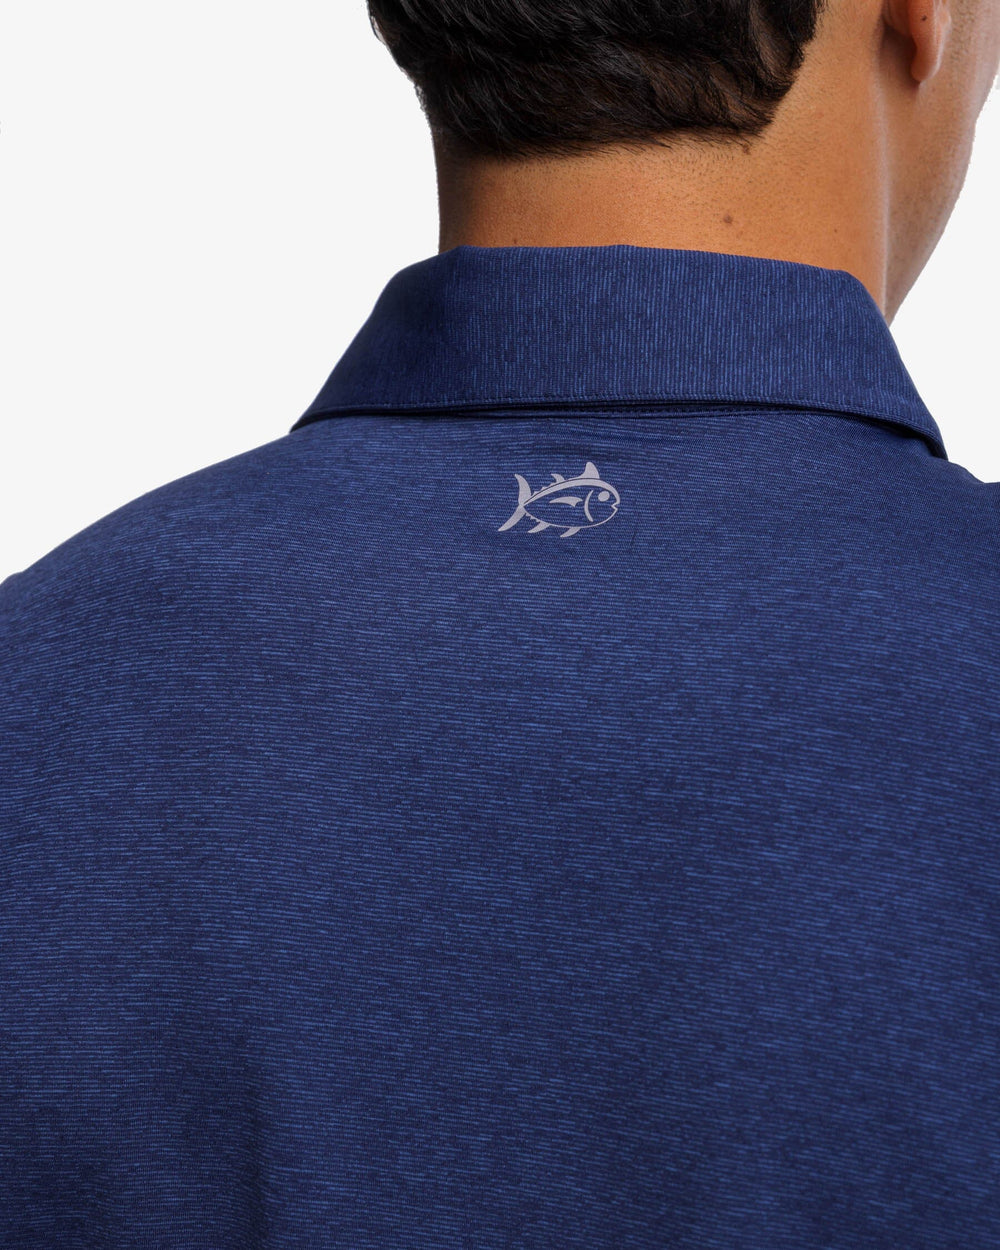 The yoke view of the brrr°®-eeze Heather Performance Polo Shirt by Southern Tide - Heather Nautical Navy